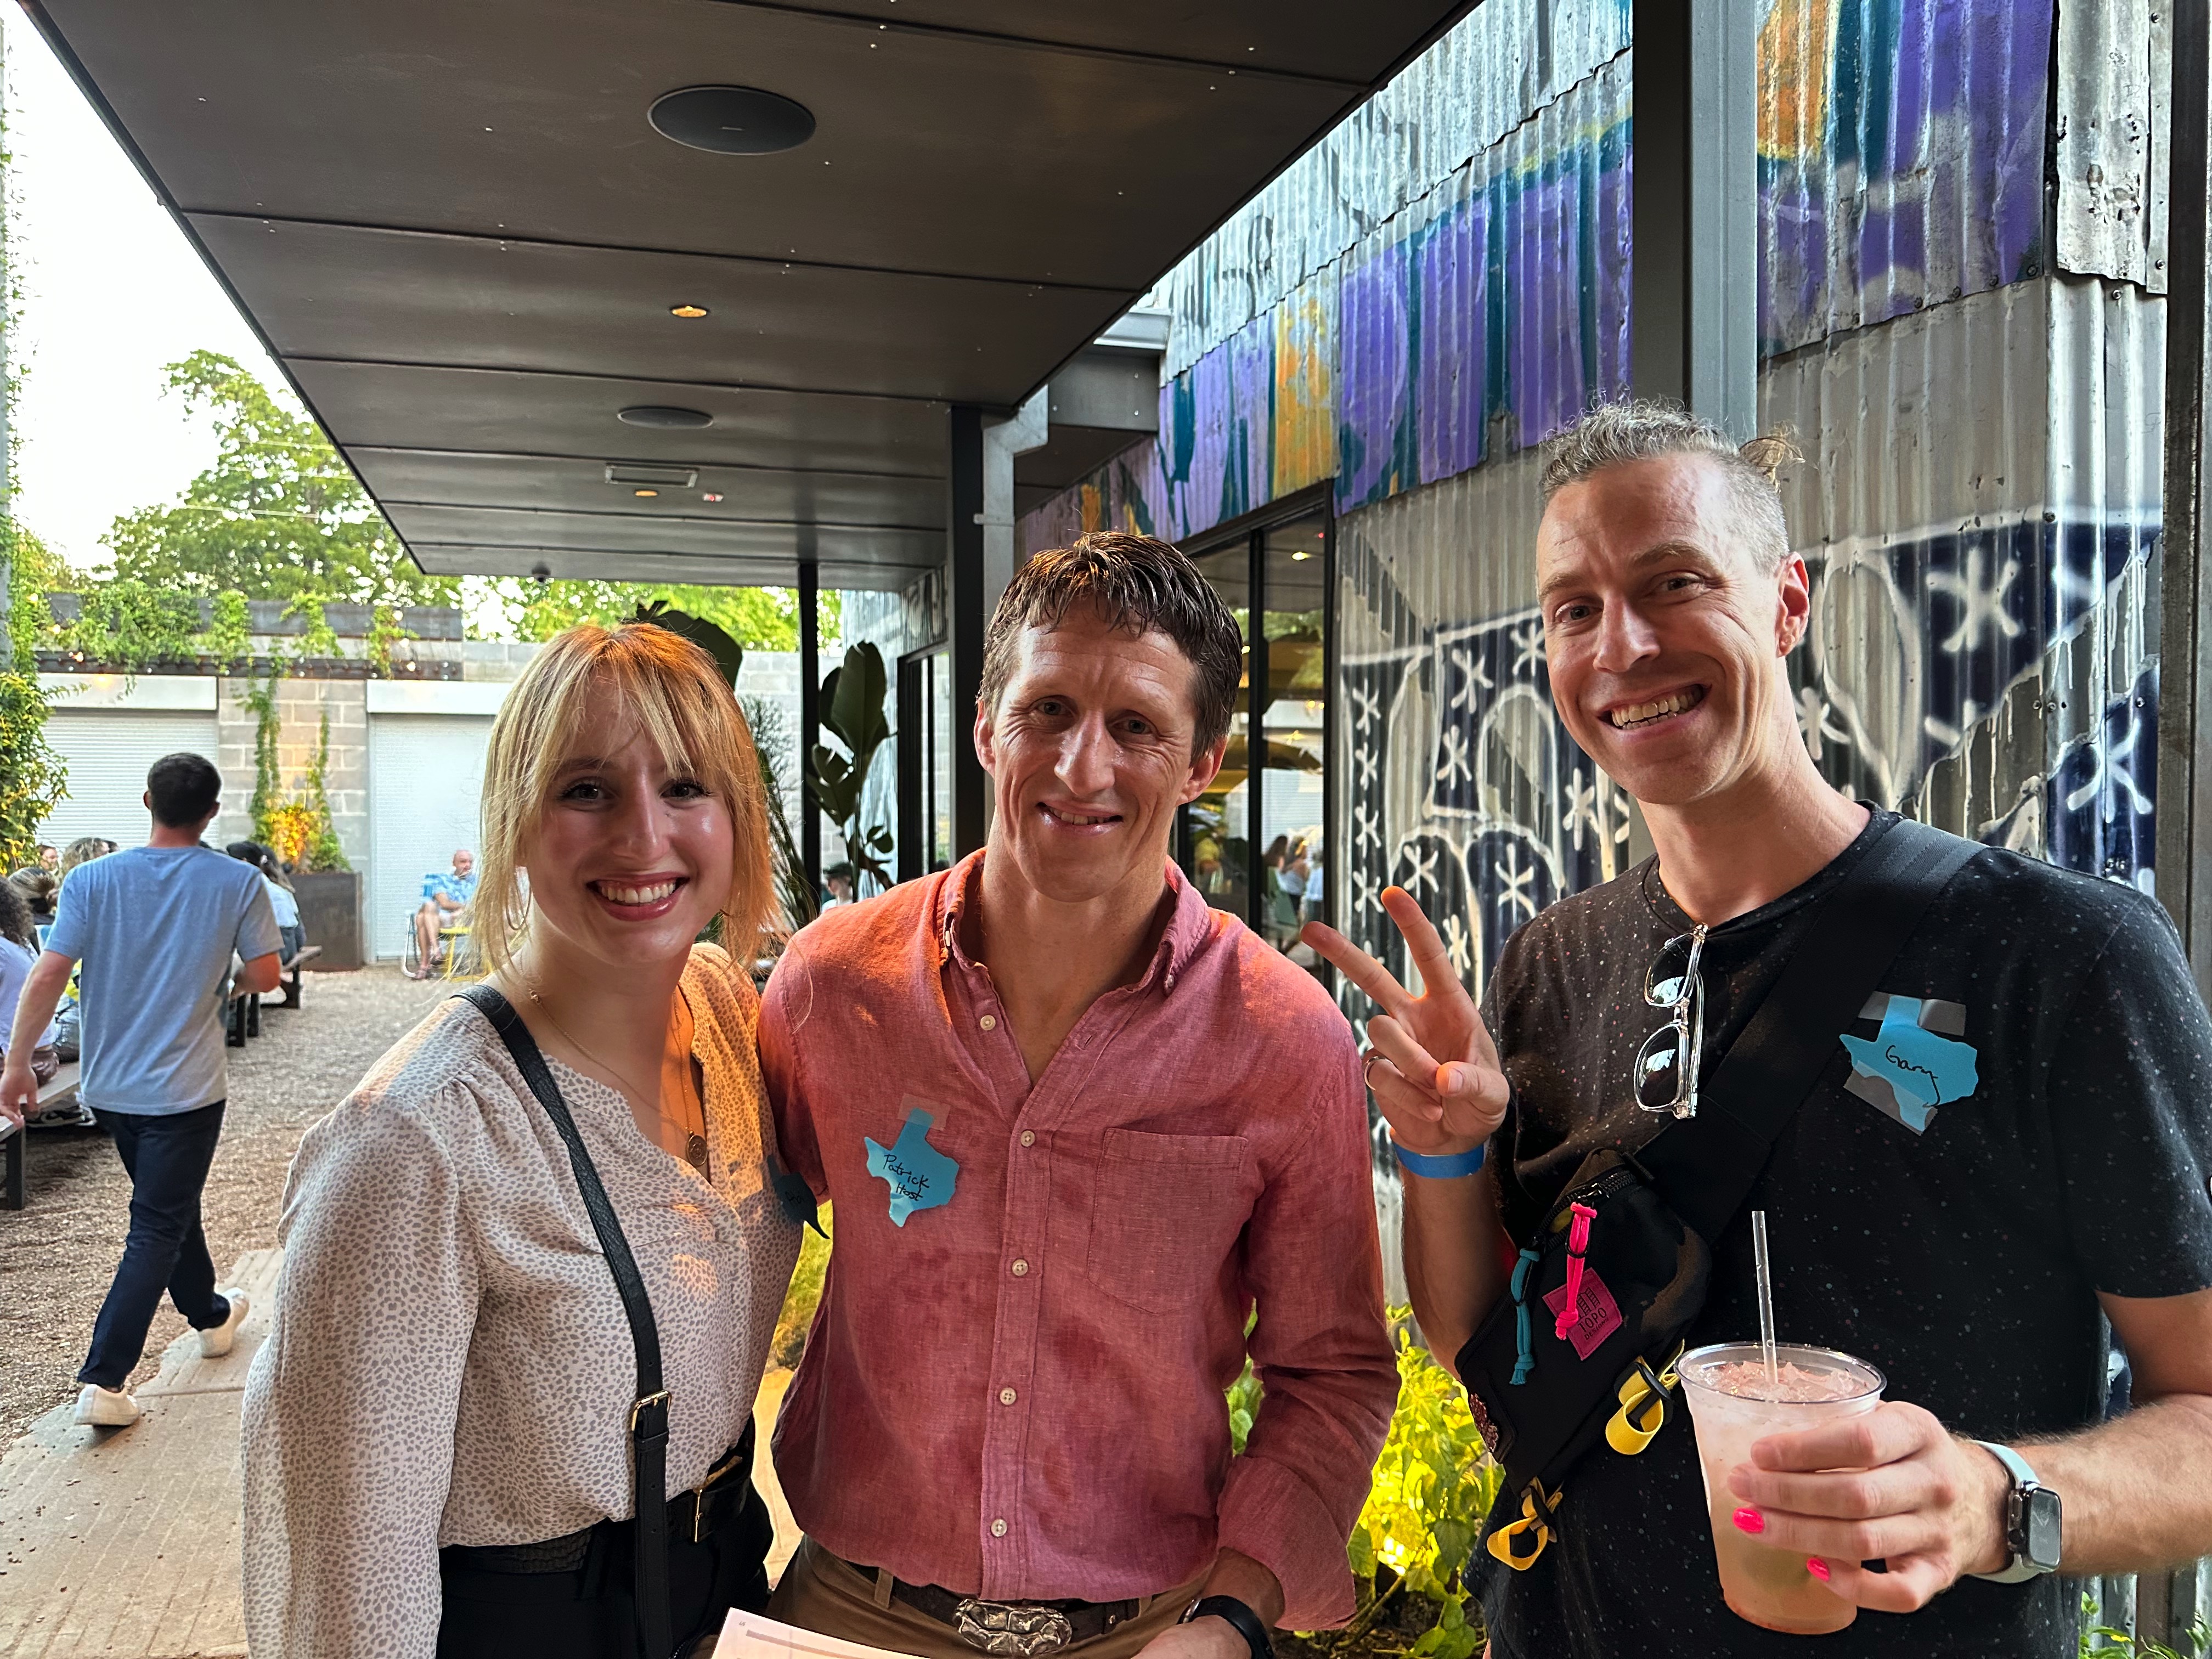 Hosts Patrick and Abigail with longtime Shopify Meetup member Gary